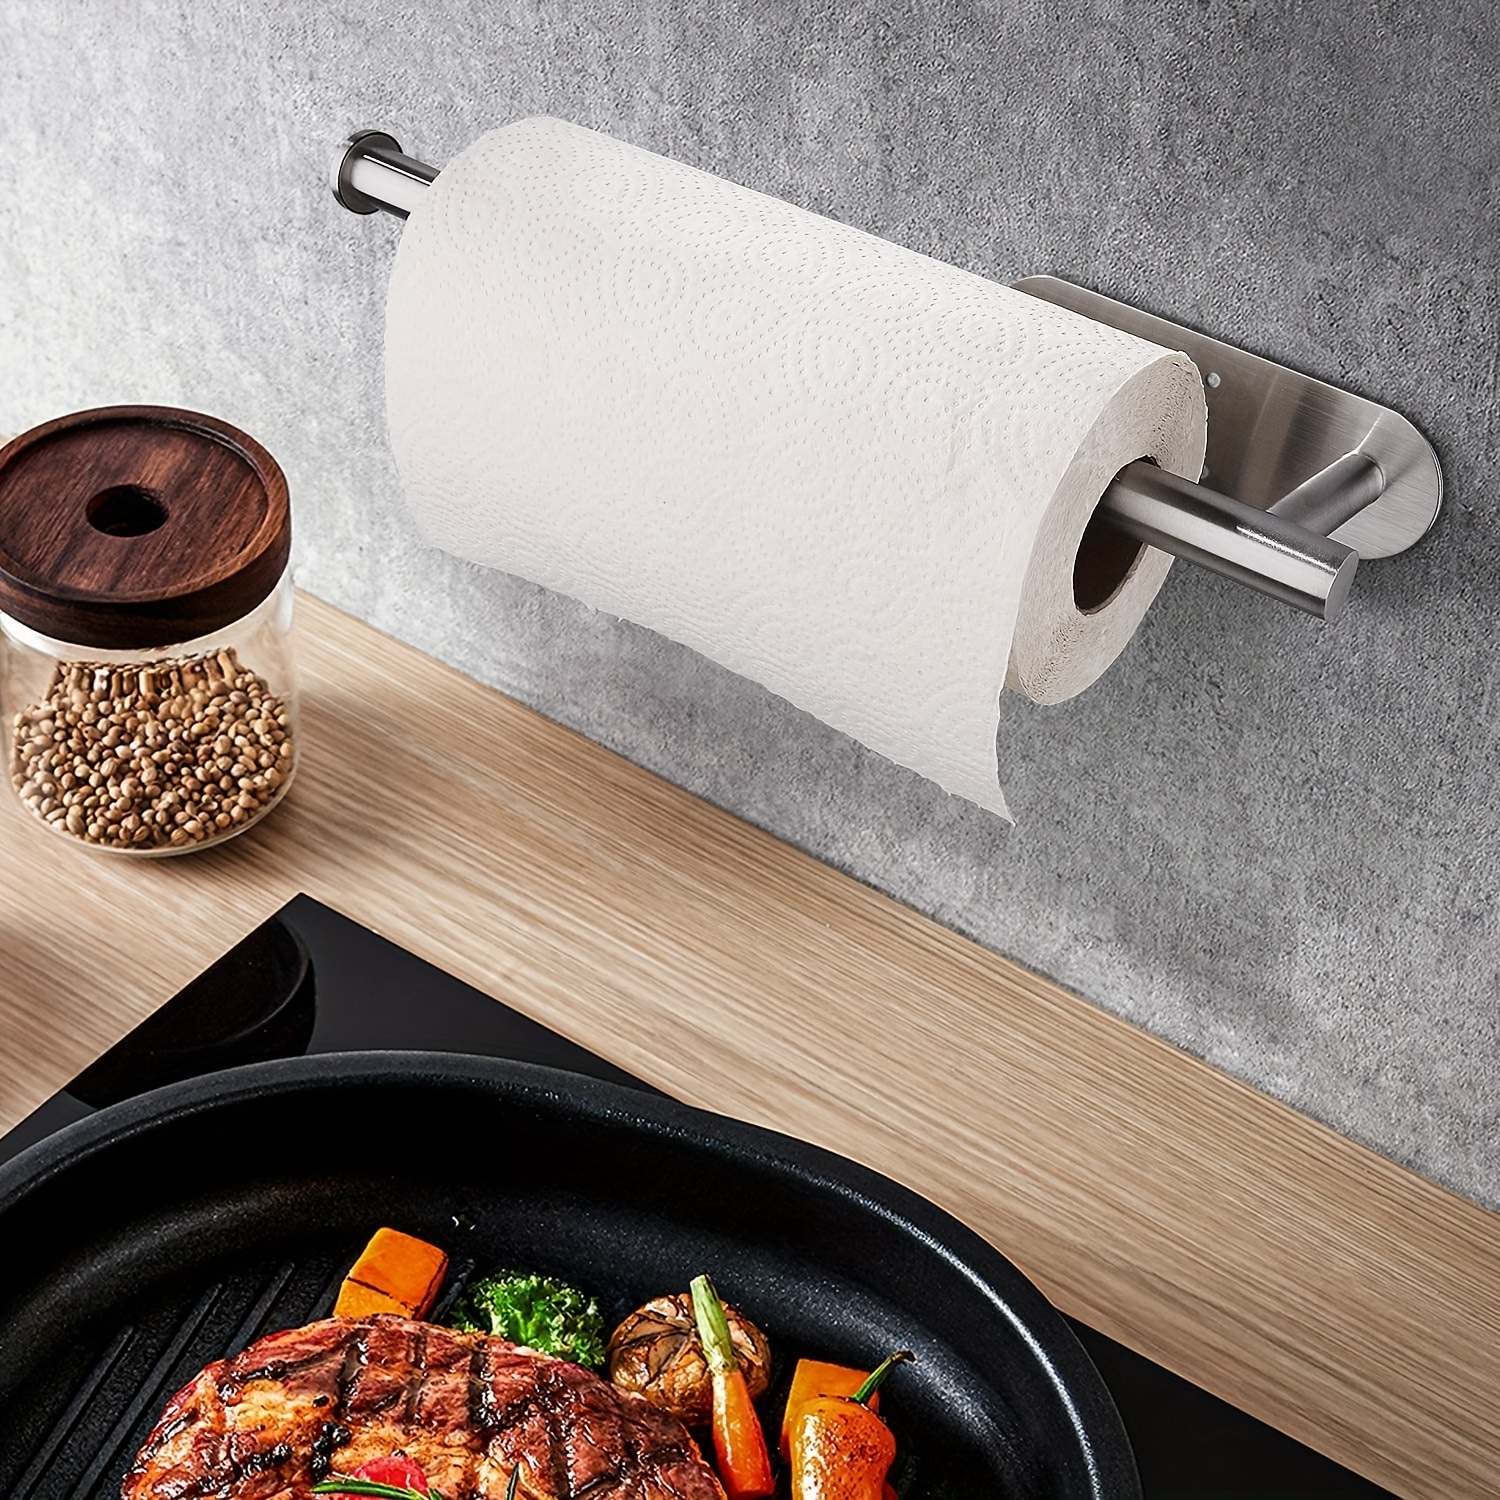 Andalusian Kitchen Roll Holder Kitchen Towel,roll Holder, Kitchen